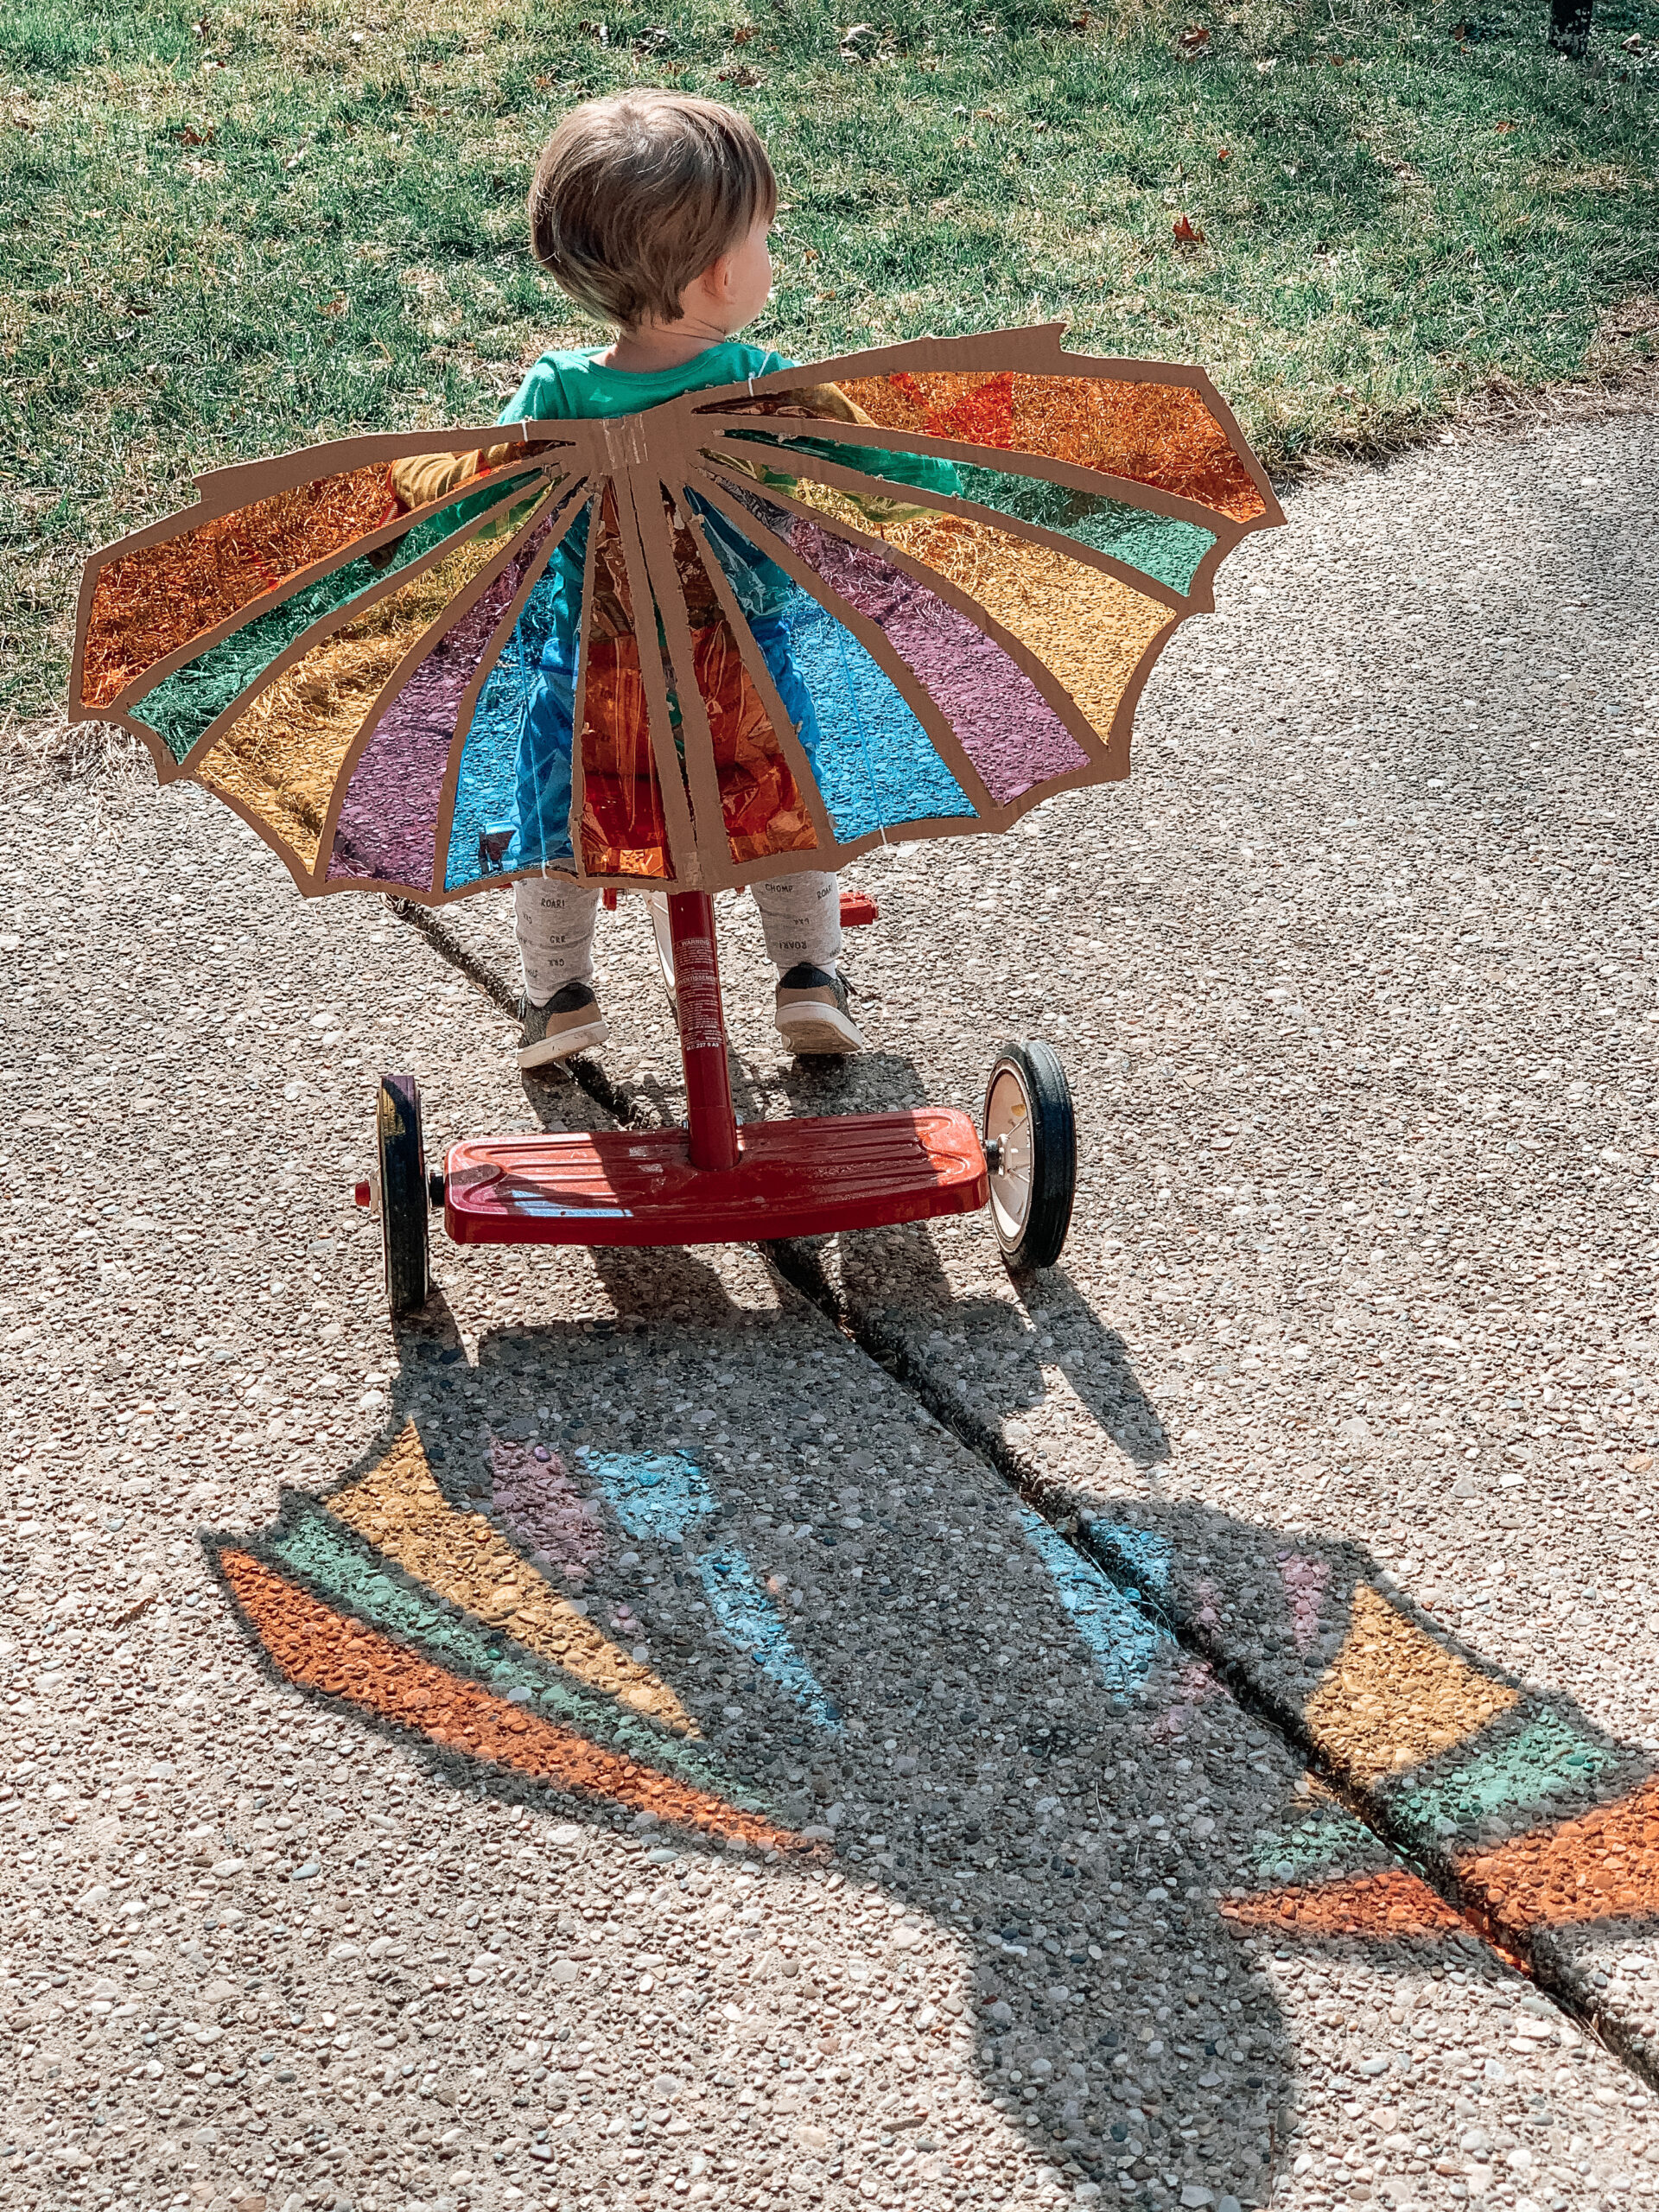 Child riding tricycle wearing dragon wings made of cardboard catching the sun